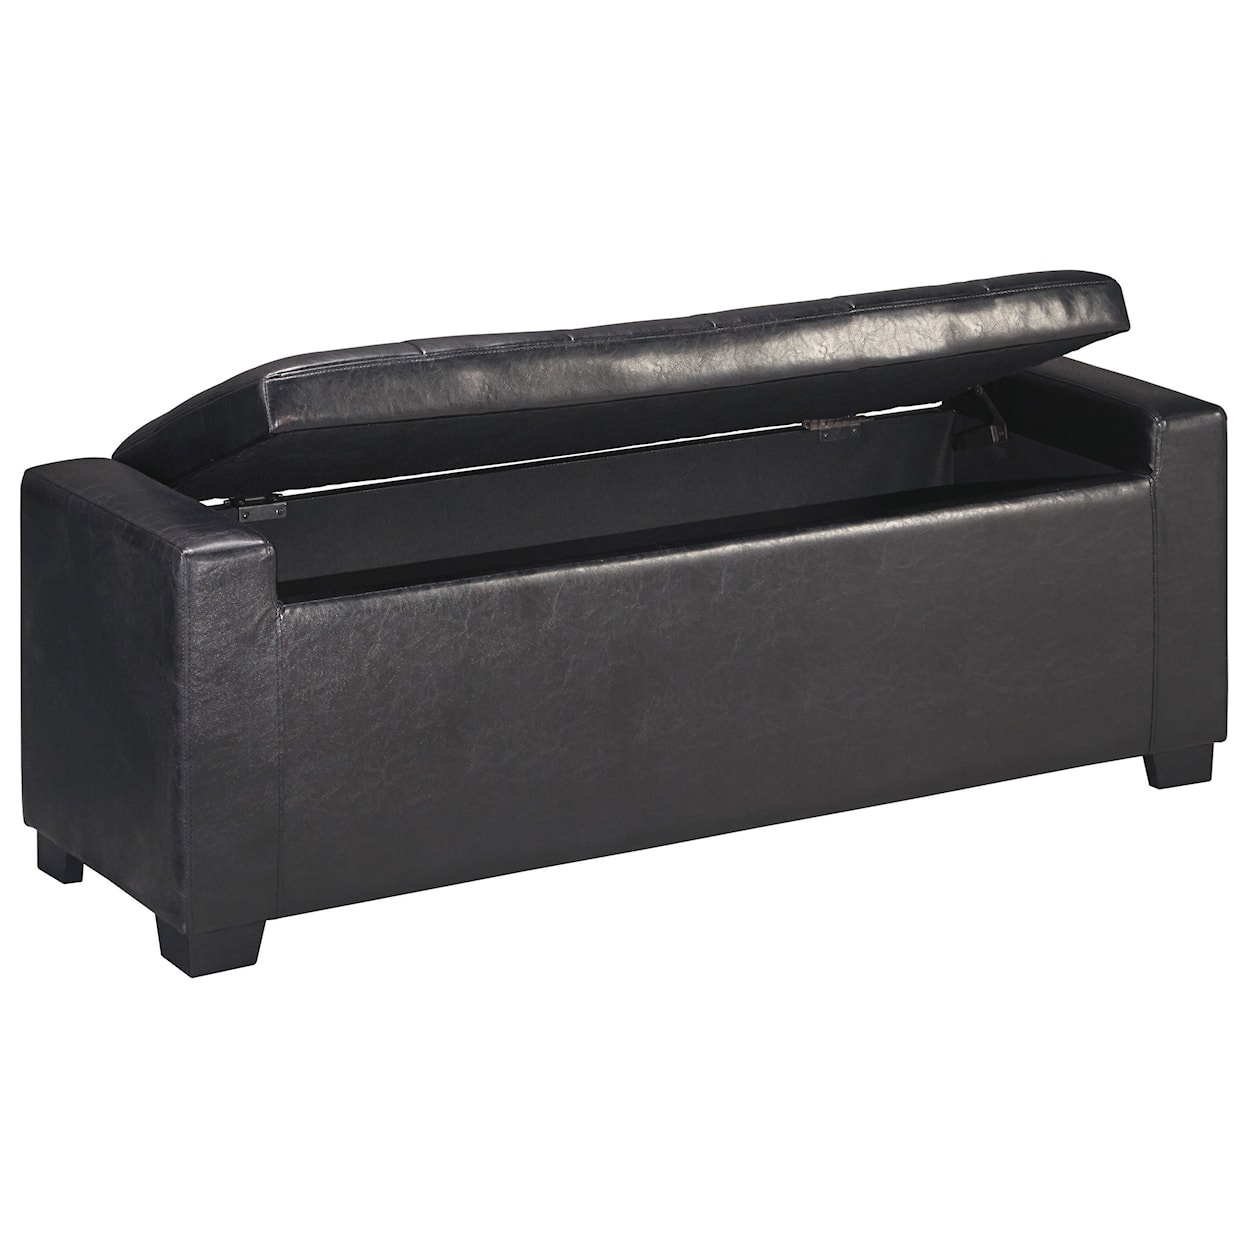 Signature Design by Ashley Benches Upholstered Storage Bench